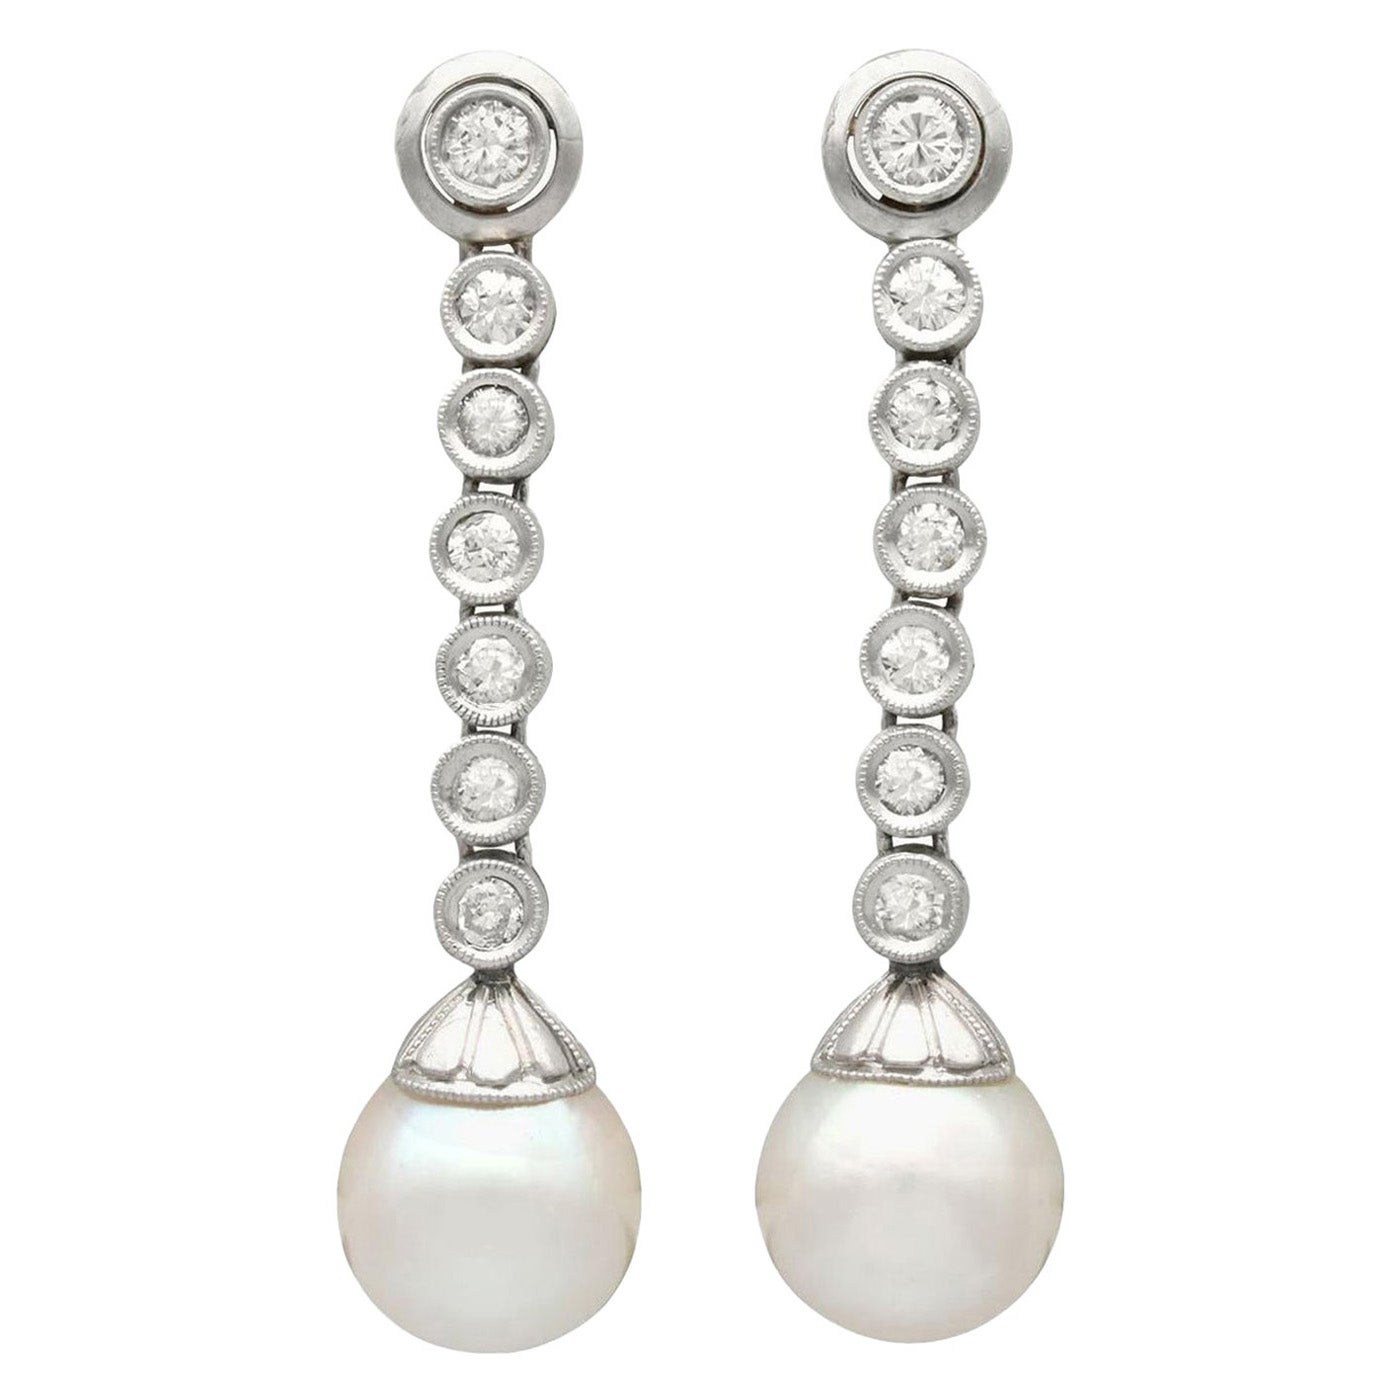 1.10 Carat Diamond and Cultured Pearl Platinum and White Gold Drop Earrings